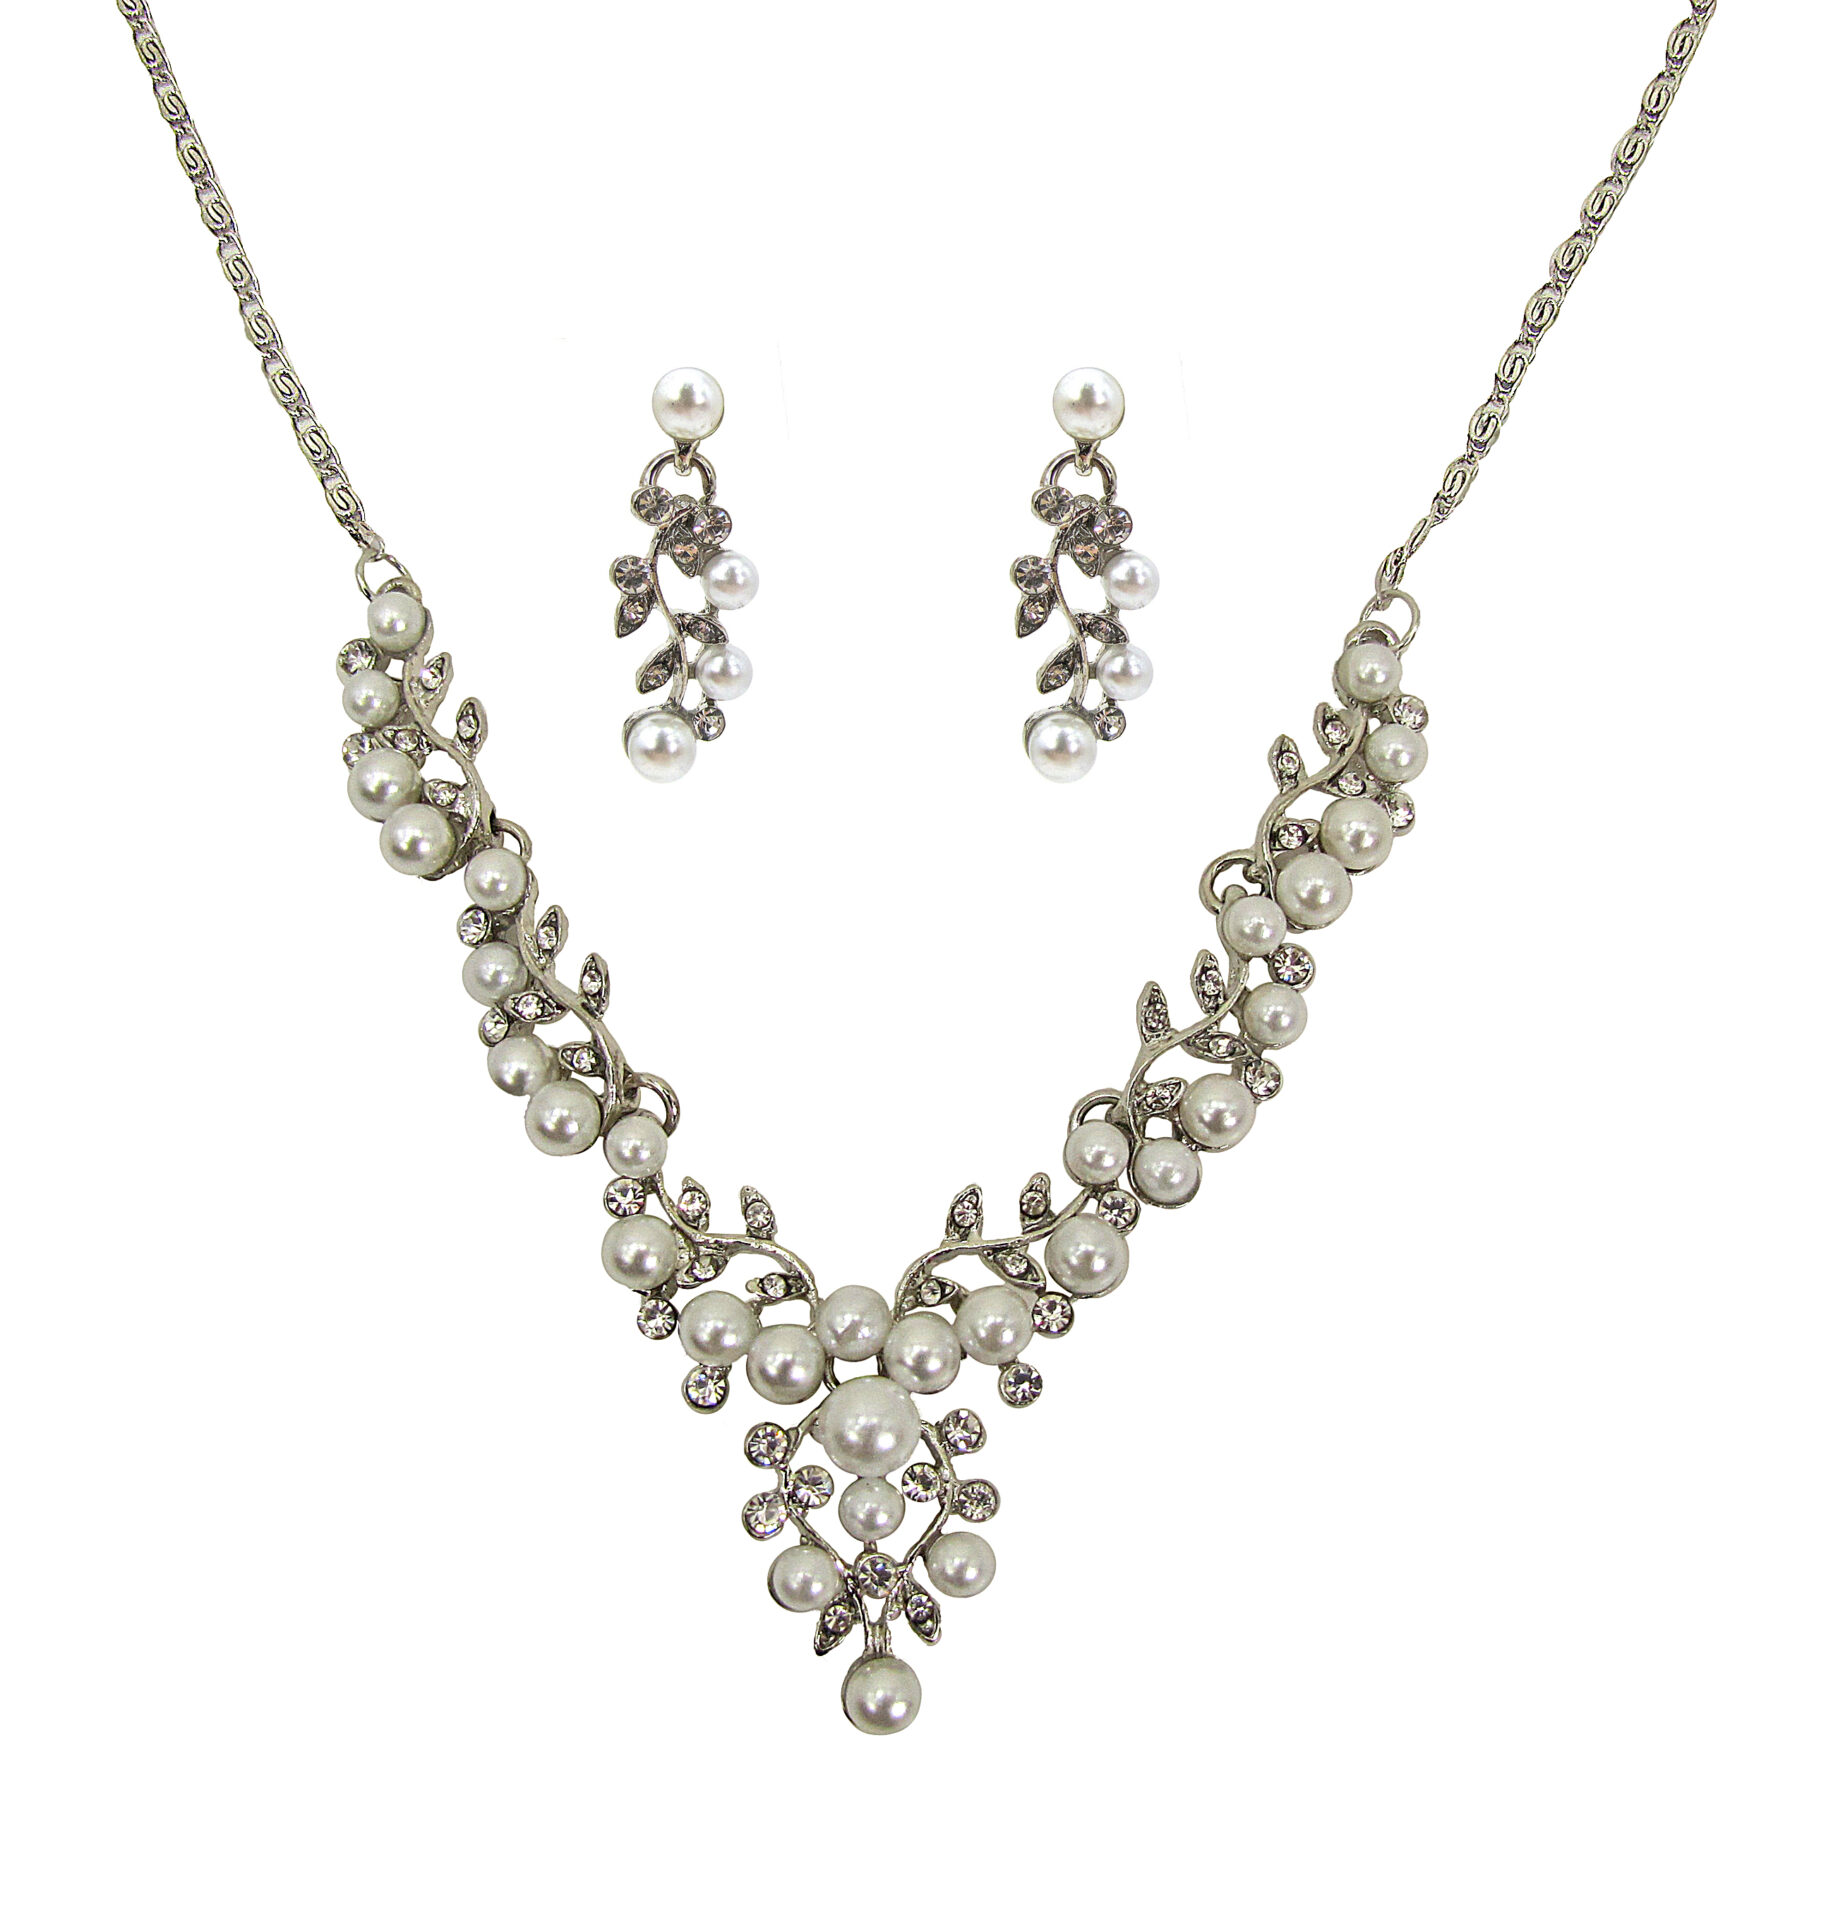 A set of silver stone and white pearl necklace and earrings